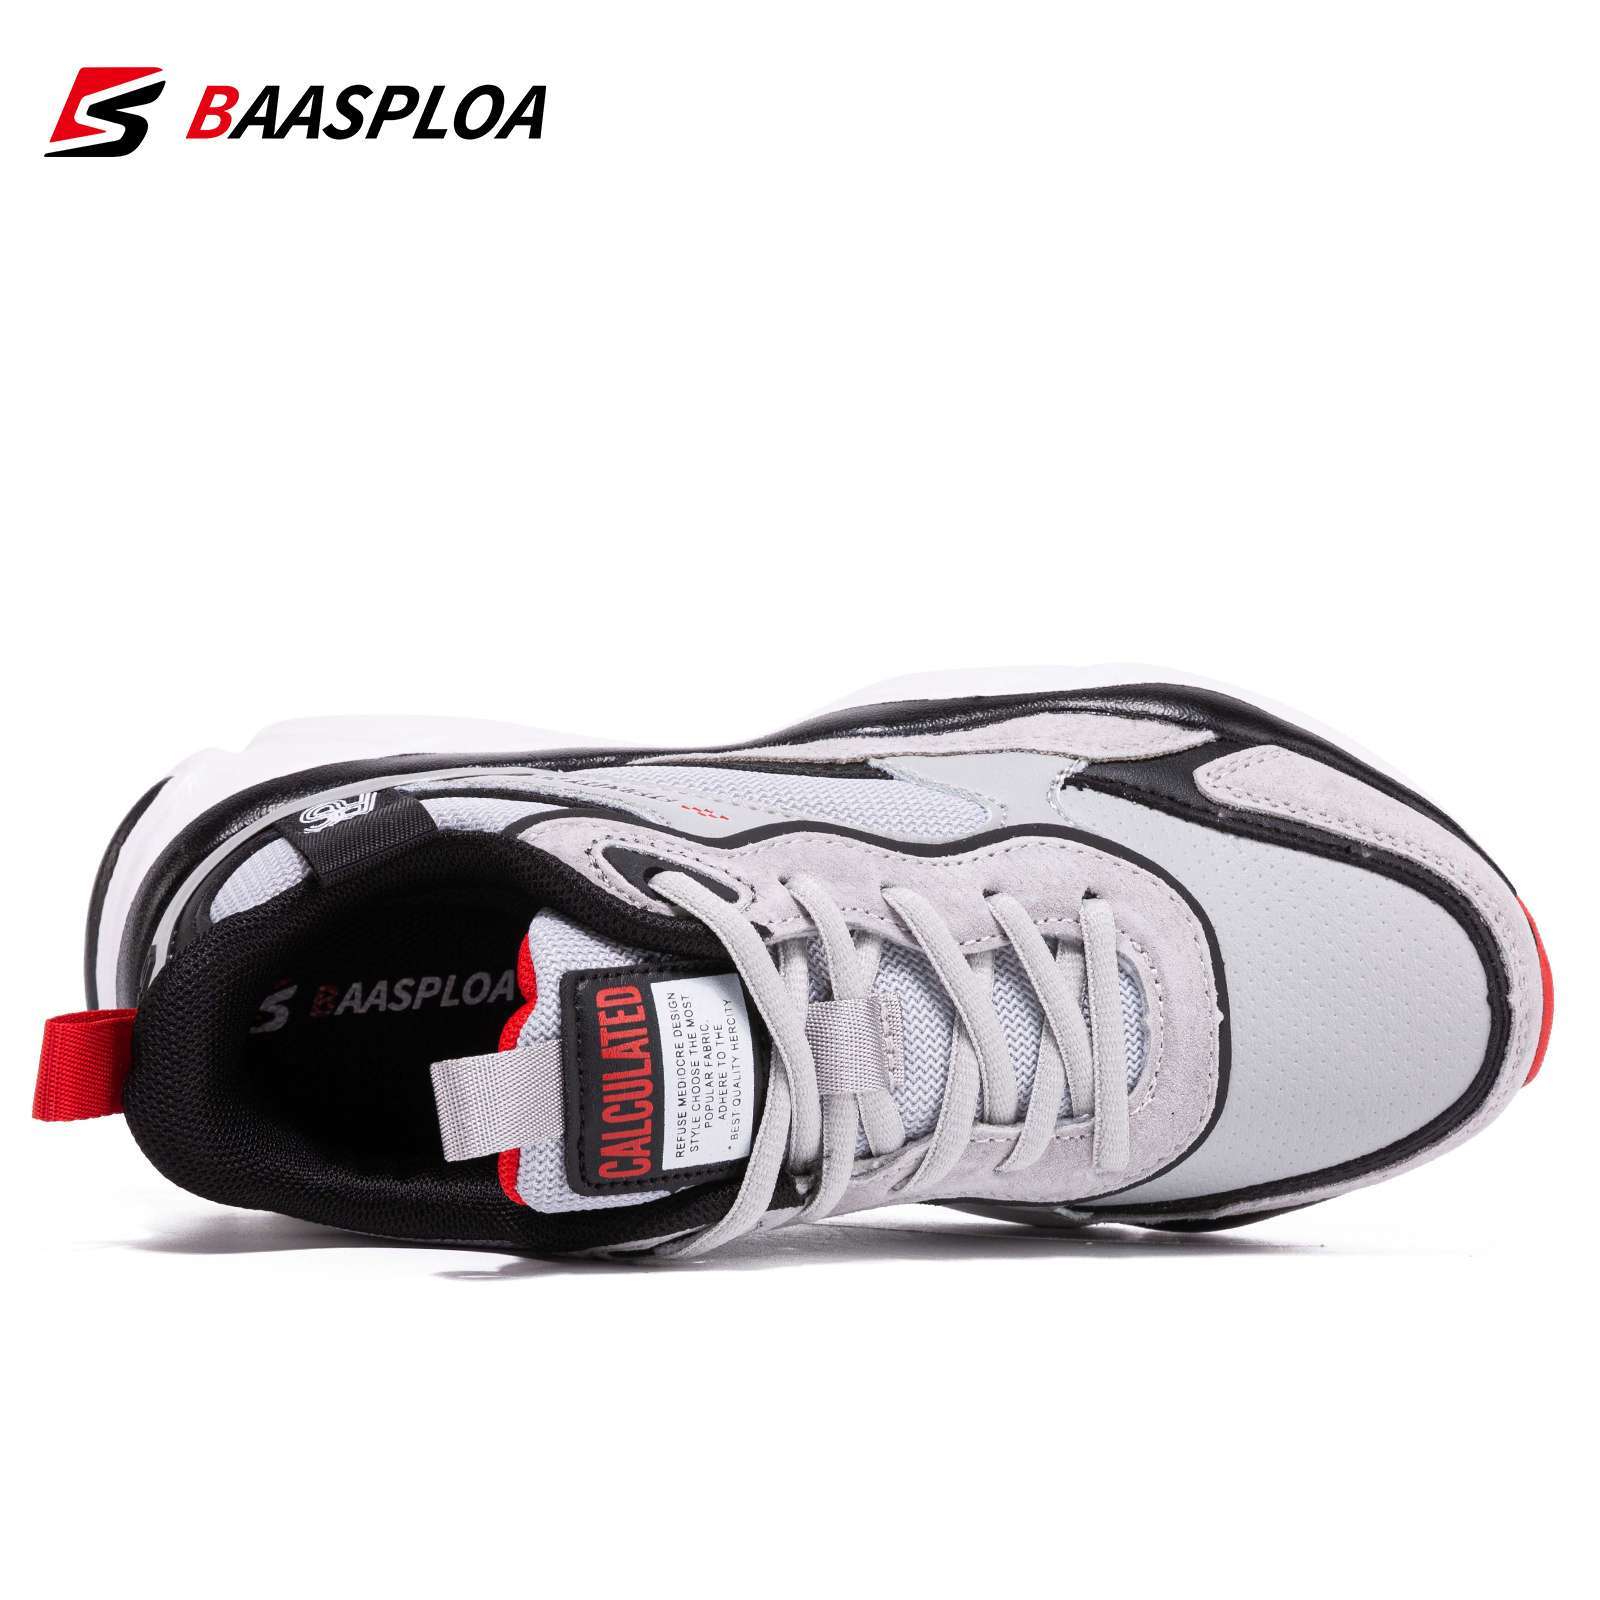 Baasploa New Fashion Women s Walking Shoes Lightweight Sports Shoes Non slip Leather Comfortable Female Sneakers 2